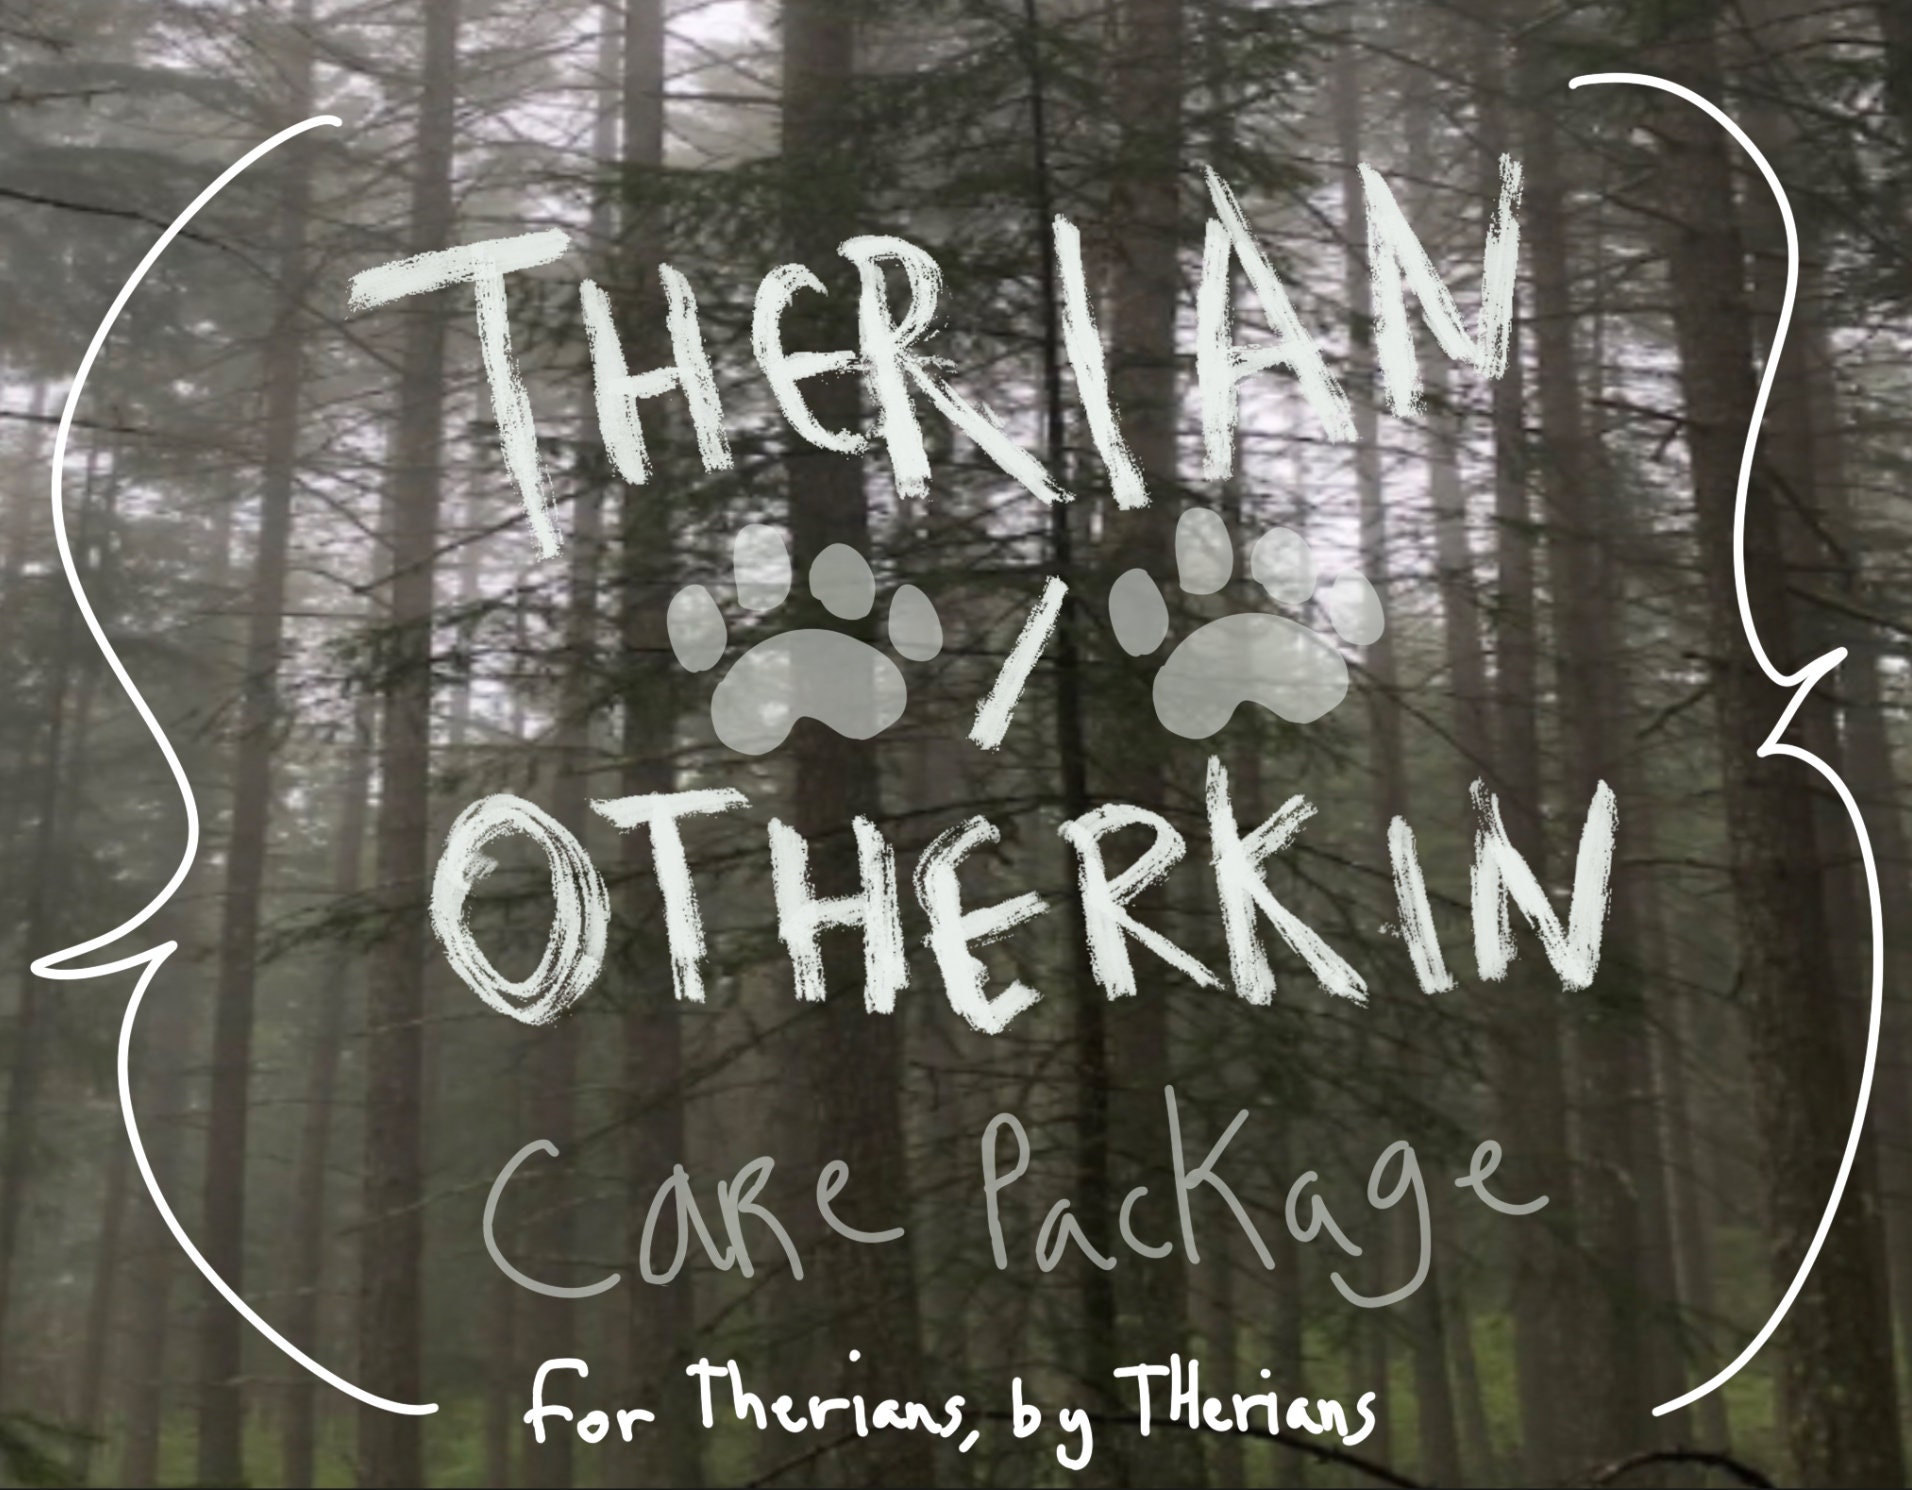 Therians & Otherkin